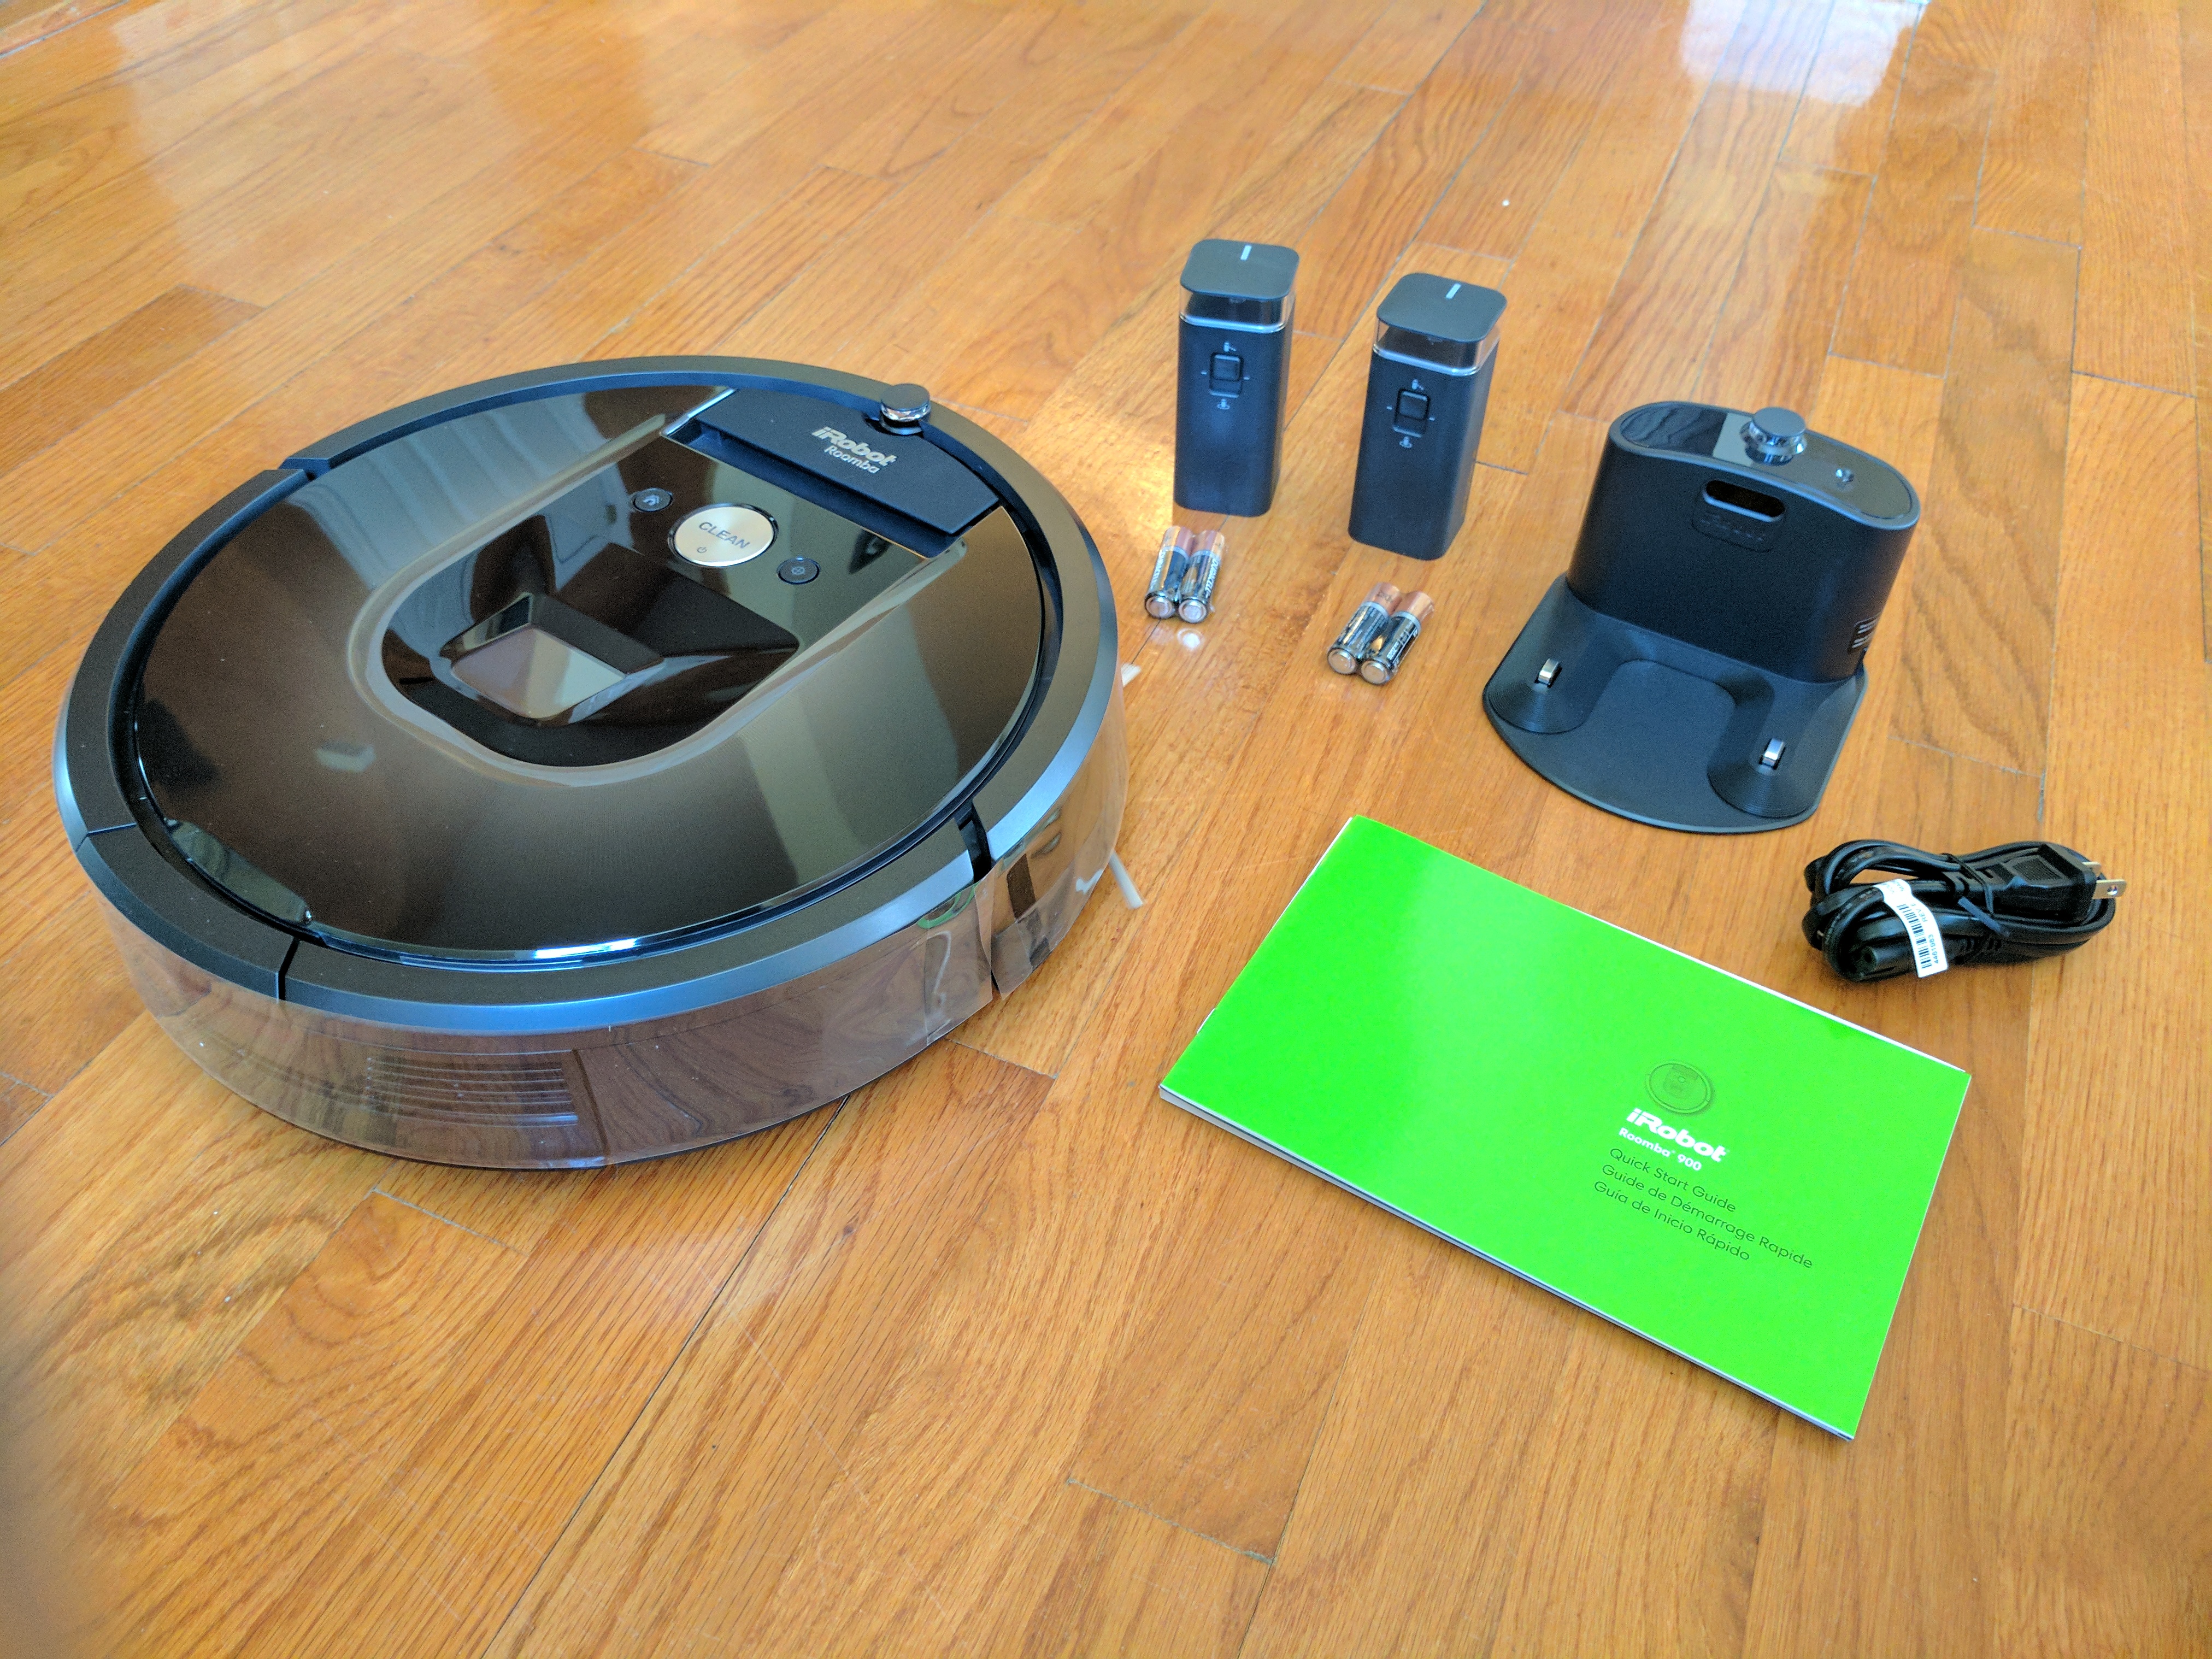 Roomba 980 Review: The Pinnacle of iRobot's Lineup! – G Style Magazine